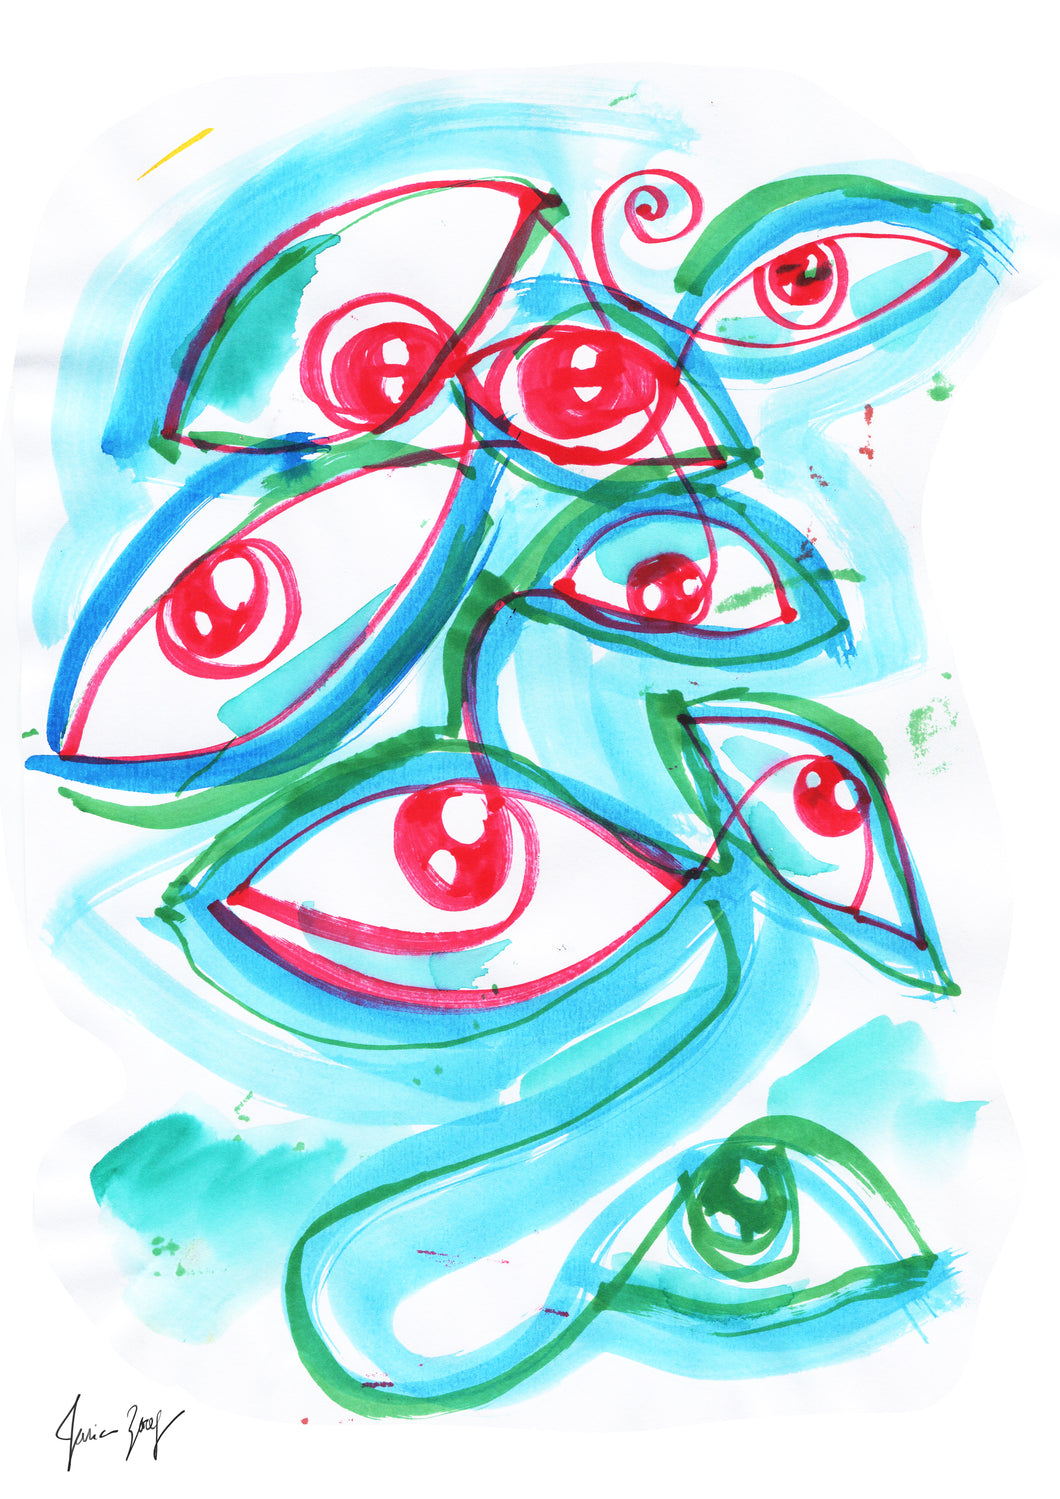 Abstract eye painting with a few eyes connected with lines of red, green and blue - Eyes of Fashion by Talia Zoref